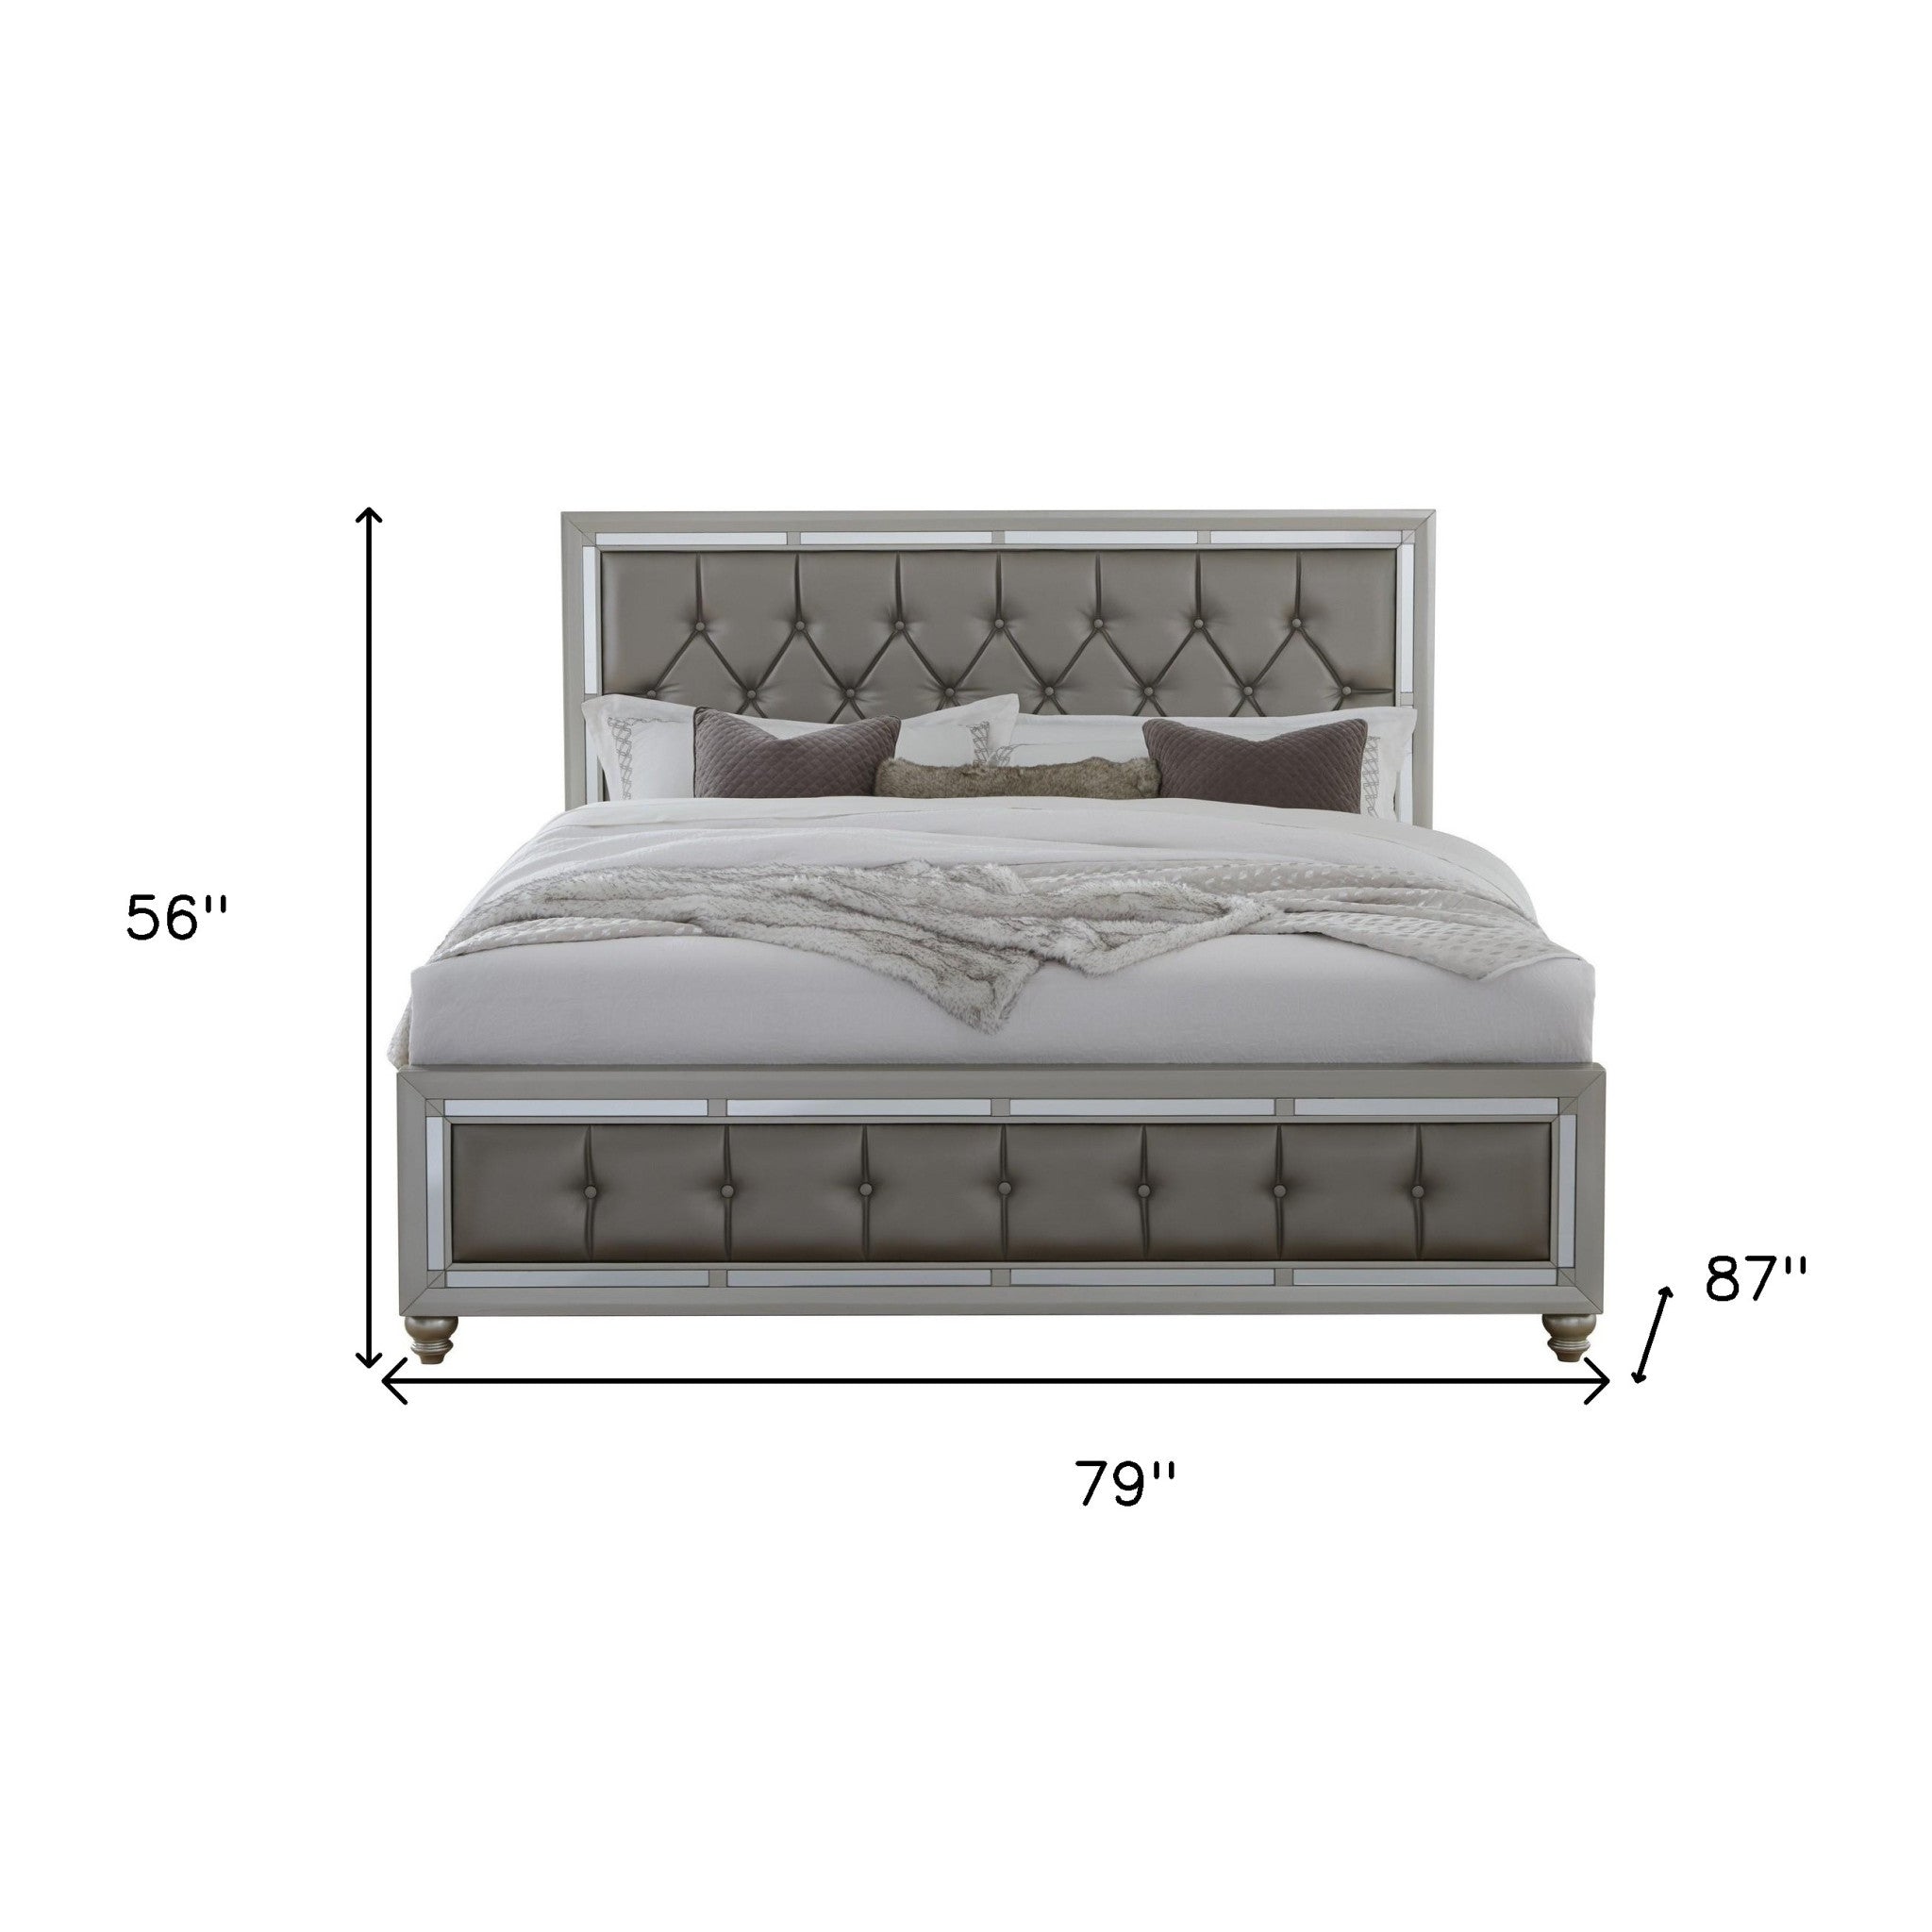 Solid Wood Full Tufted Silver Upholstered Linenno Bed With Nailhead Trim